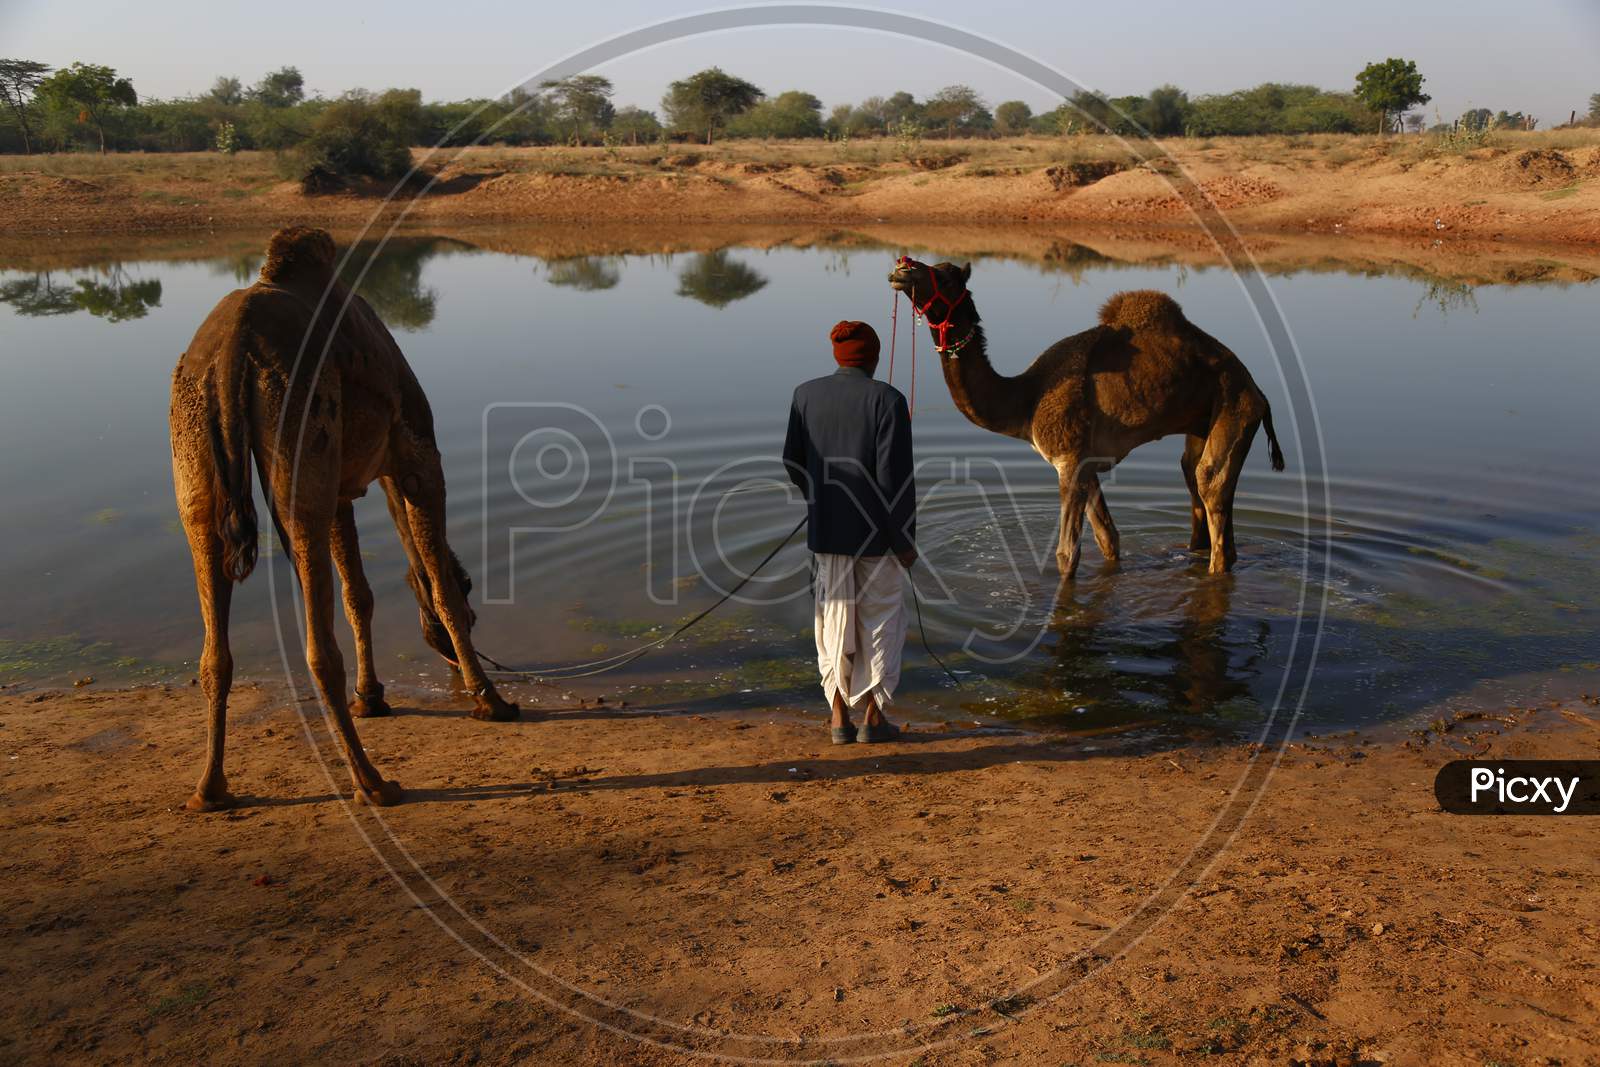 Herd Of Camels Drinking Water In a Lake  At Nagaur Cattle Fair, Nagaur